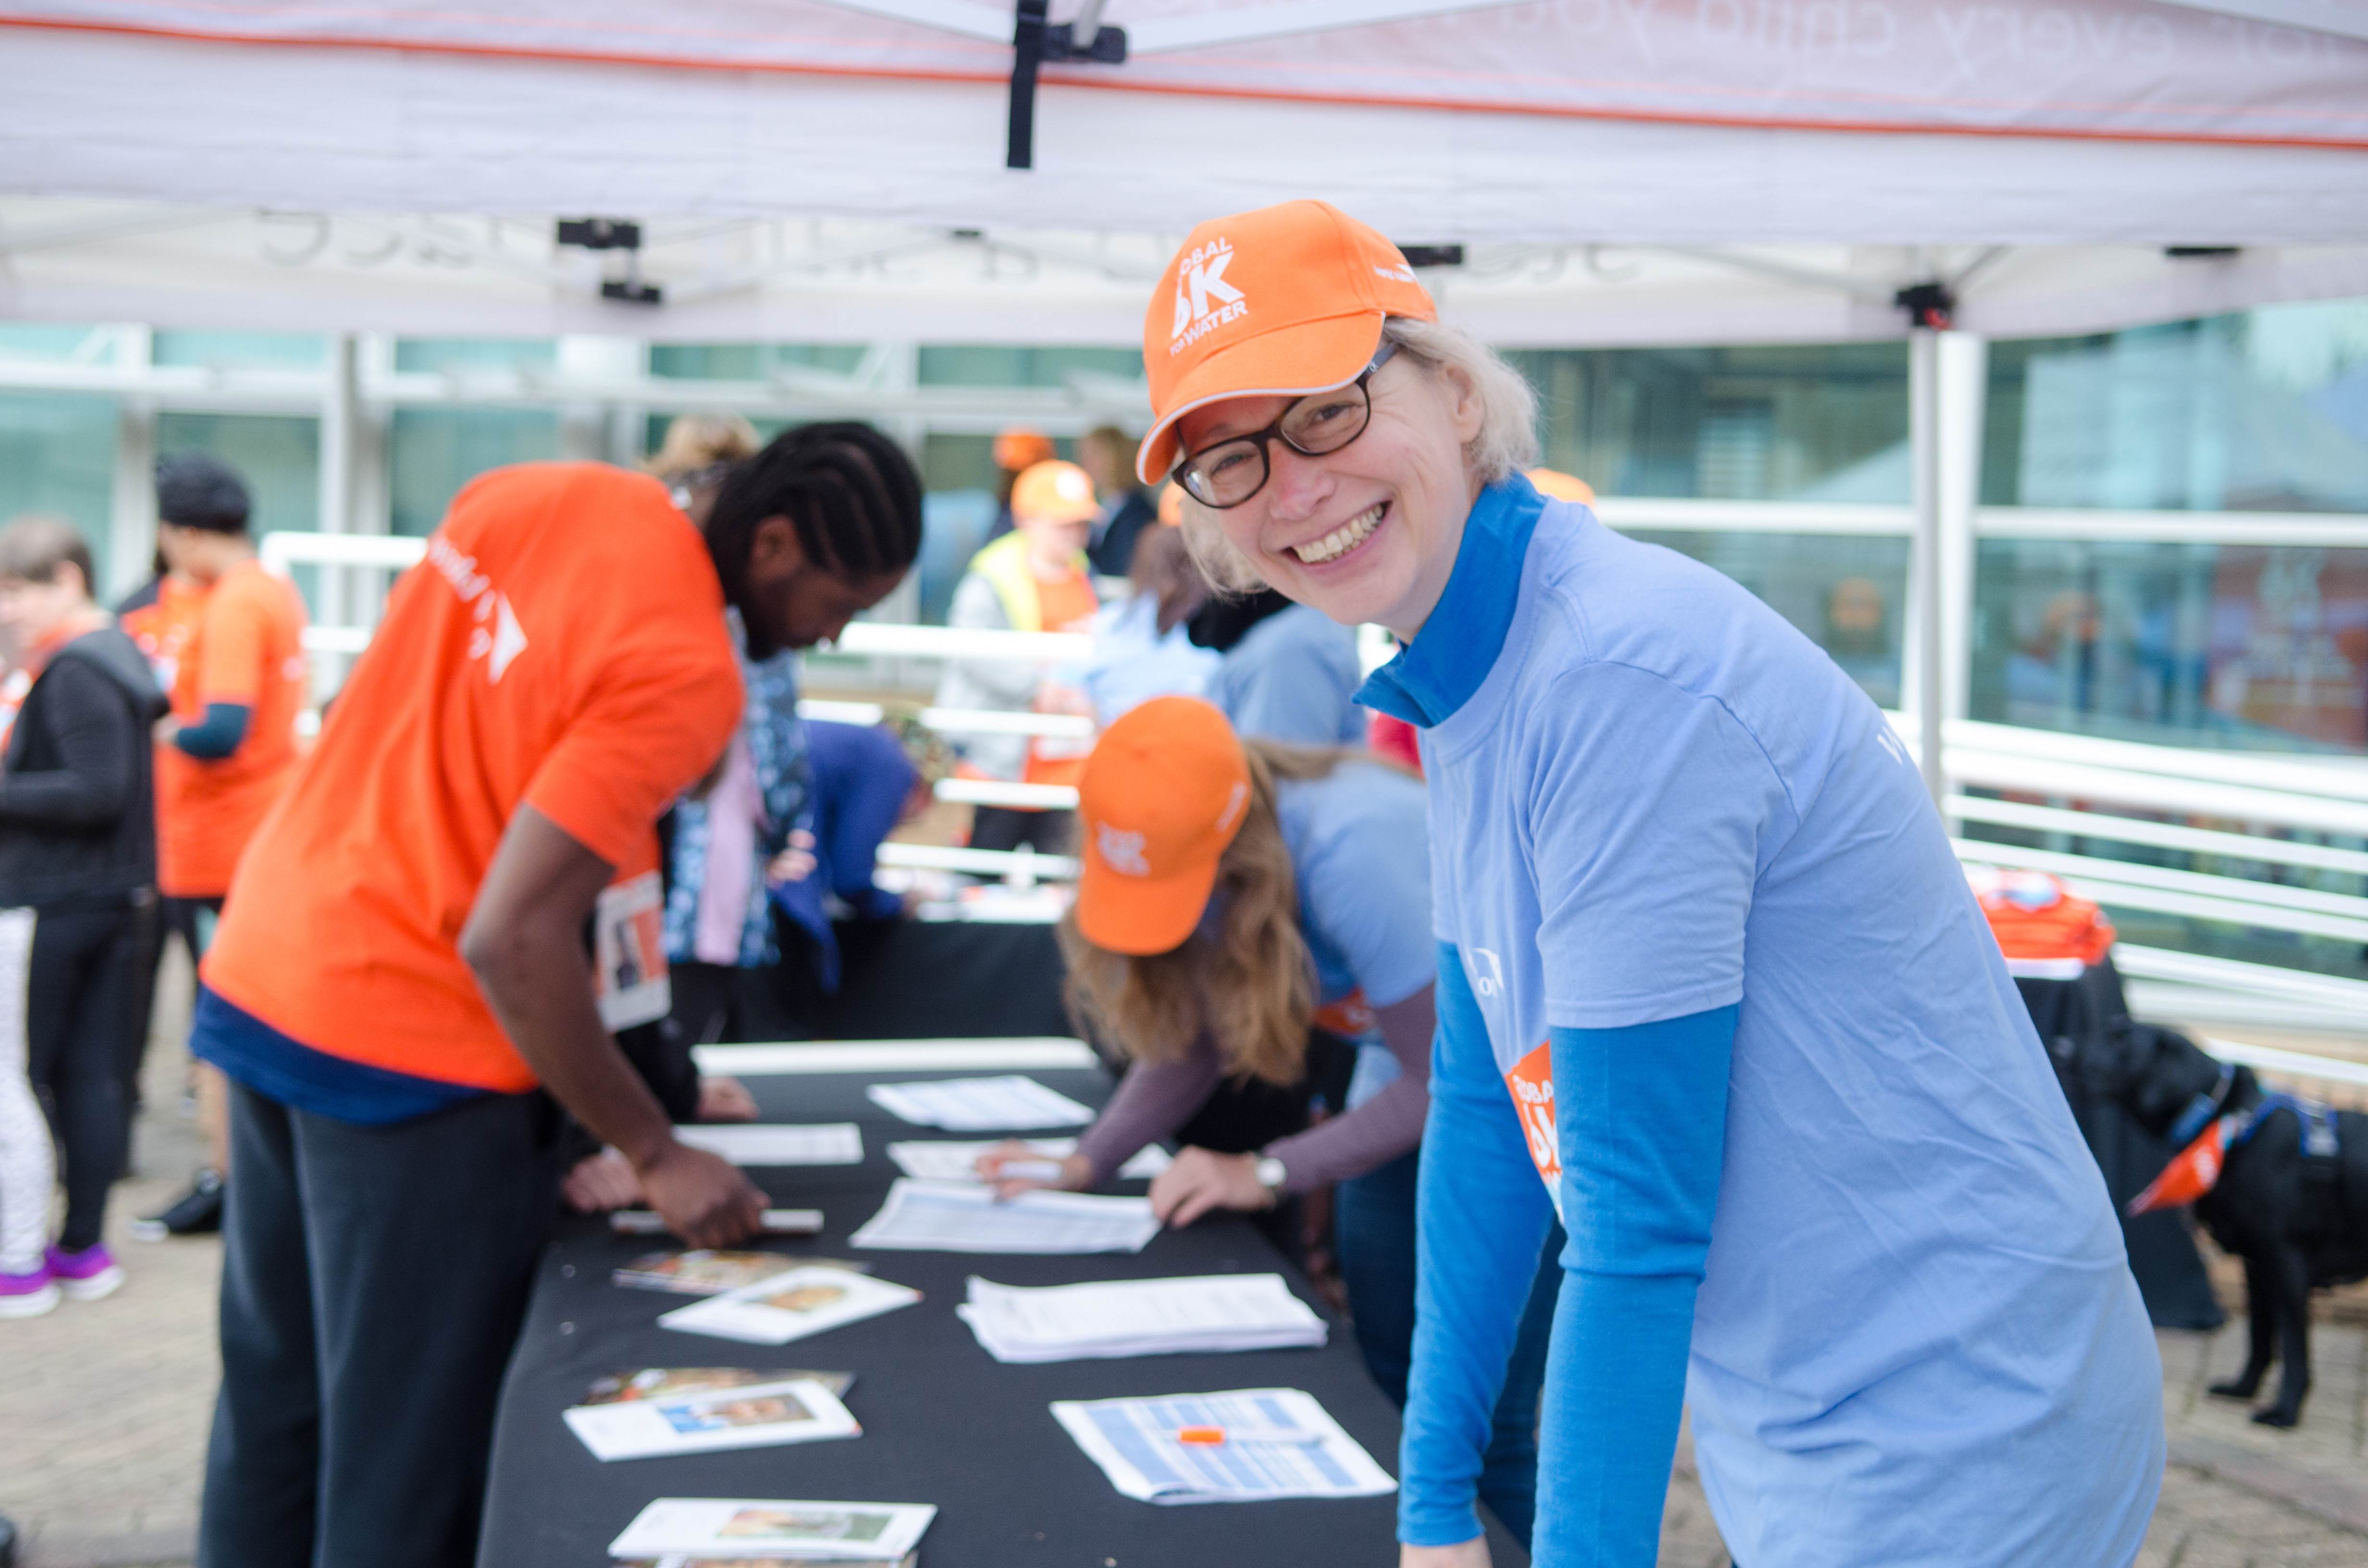 A volunteer in the UK gets involved at a World Vision event helping to register participants